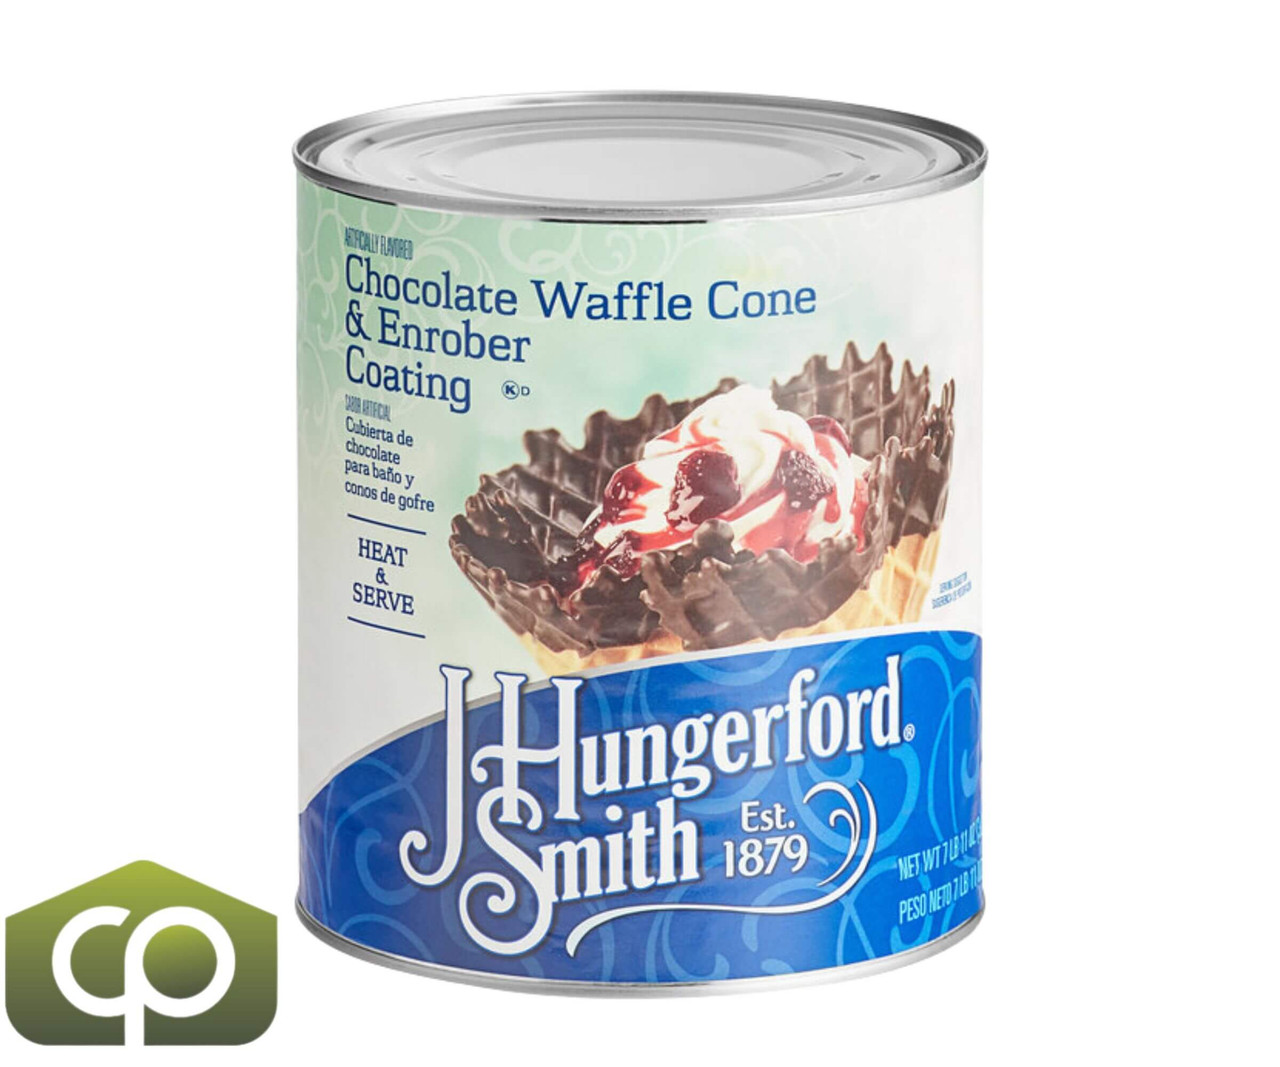 J. Hungerford Smith Chocolate Enrober Coating - 23 lb. (10.43 kg)-Chicken Pieces